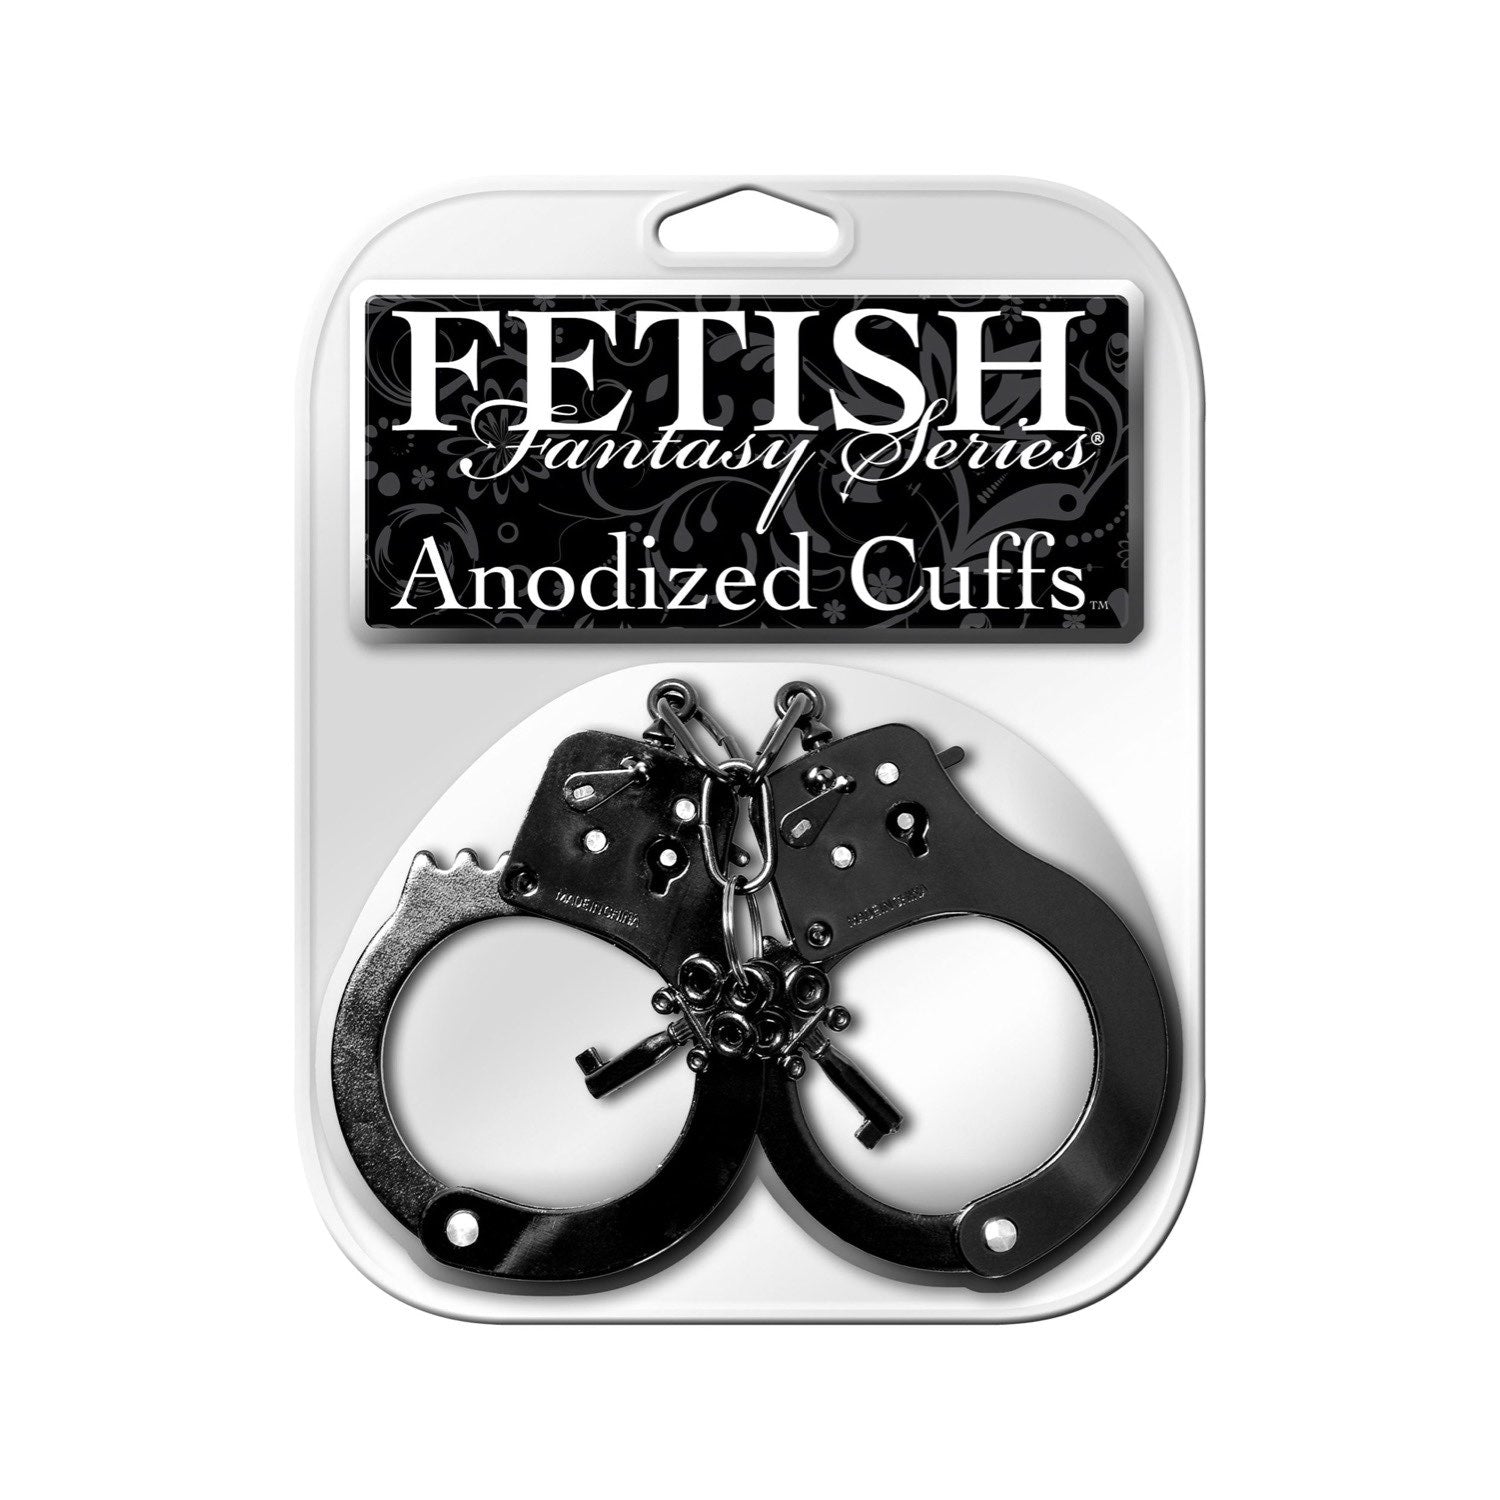 Fetish Fantasy Series Anodized Cuffs - Black Metal Restraints by Pipedream